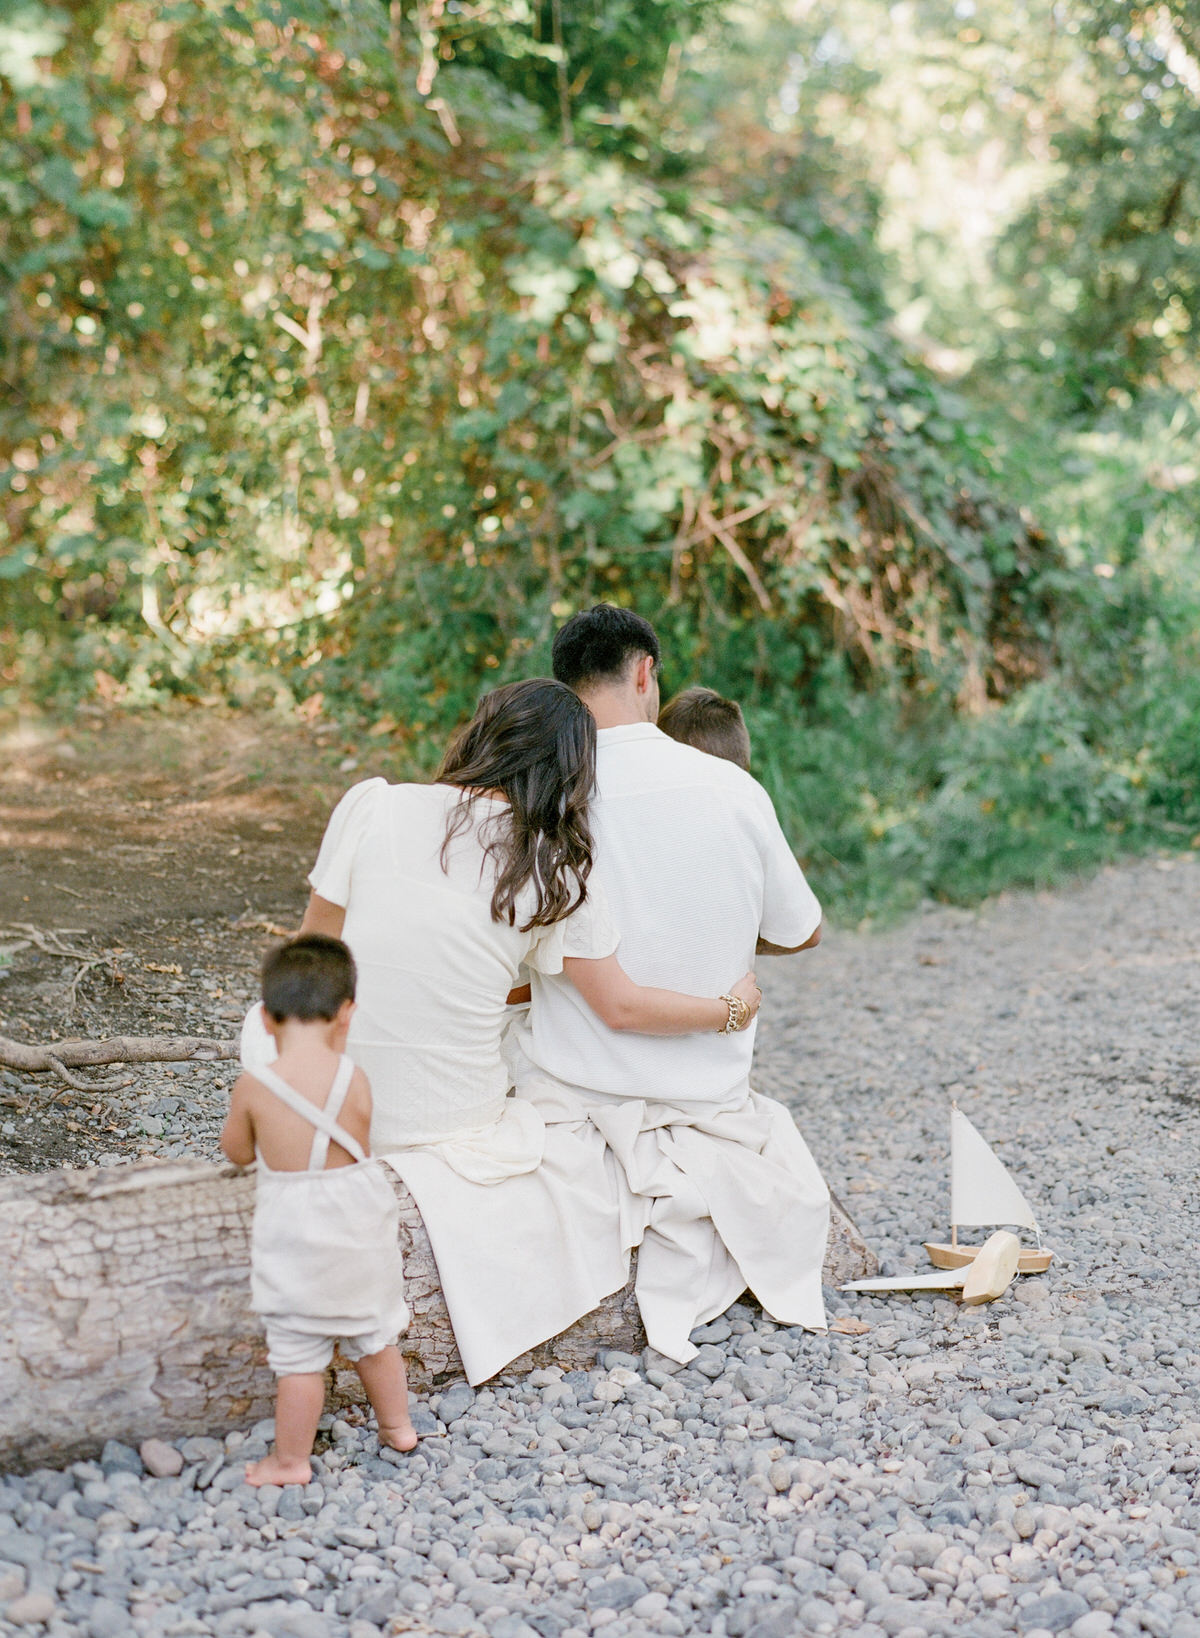 A Sunny Creekside California Family Session, Light and airy family photography - Charlotte Family Photography on Film - Family Pictures on Film - San Francisco Bay Area Family Session on Film - Kent Avenue Photography - www.kentavenuephotography.com